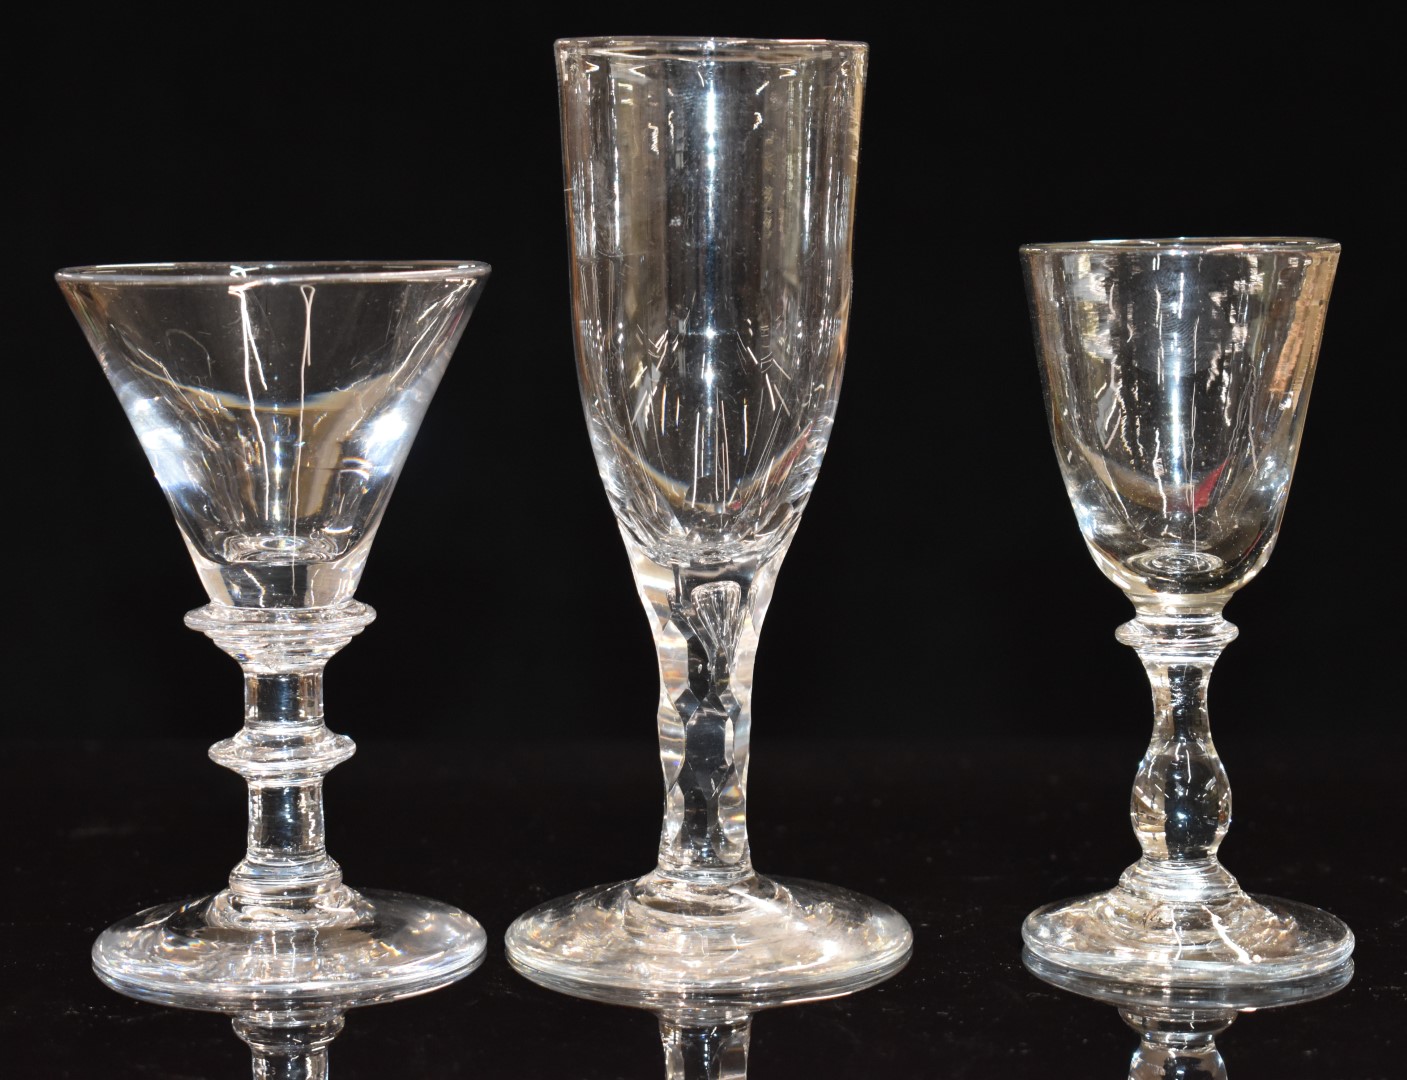 Three 19thC wine/cordial glasses including double knopped stem example, tallest 15.2cm - Image 2 of 2